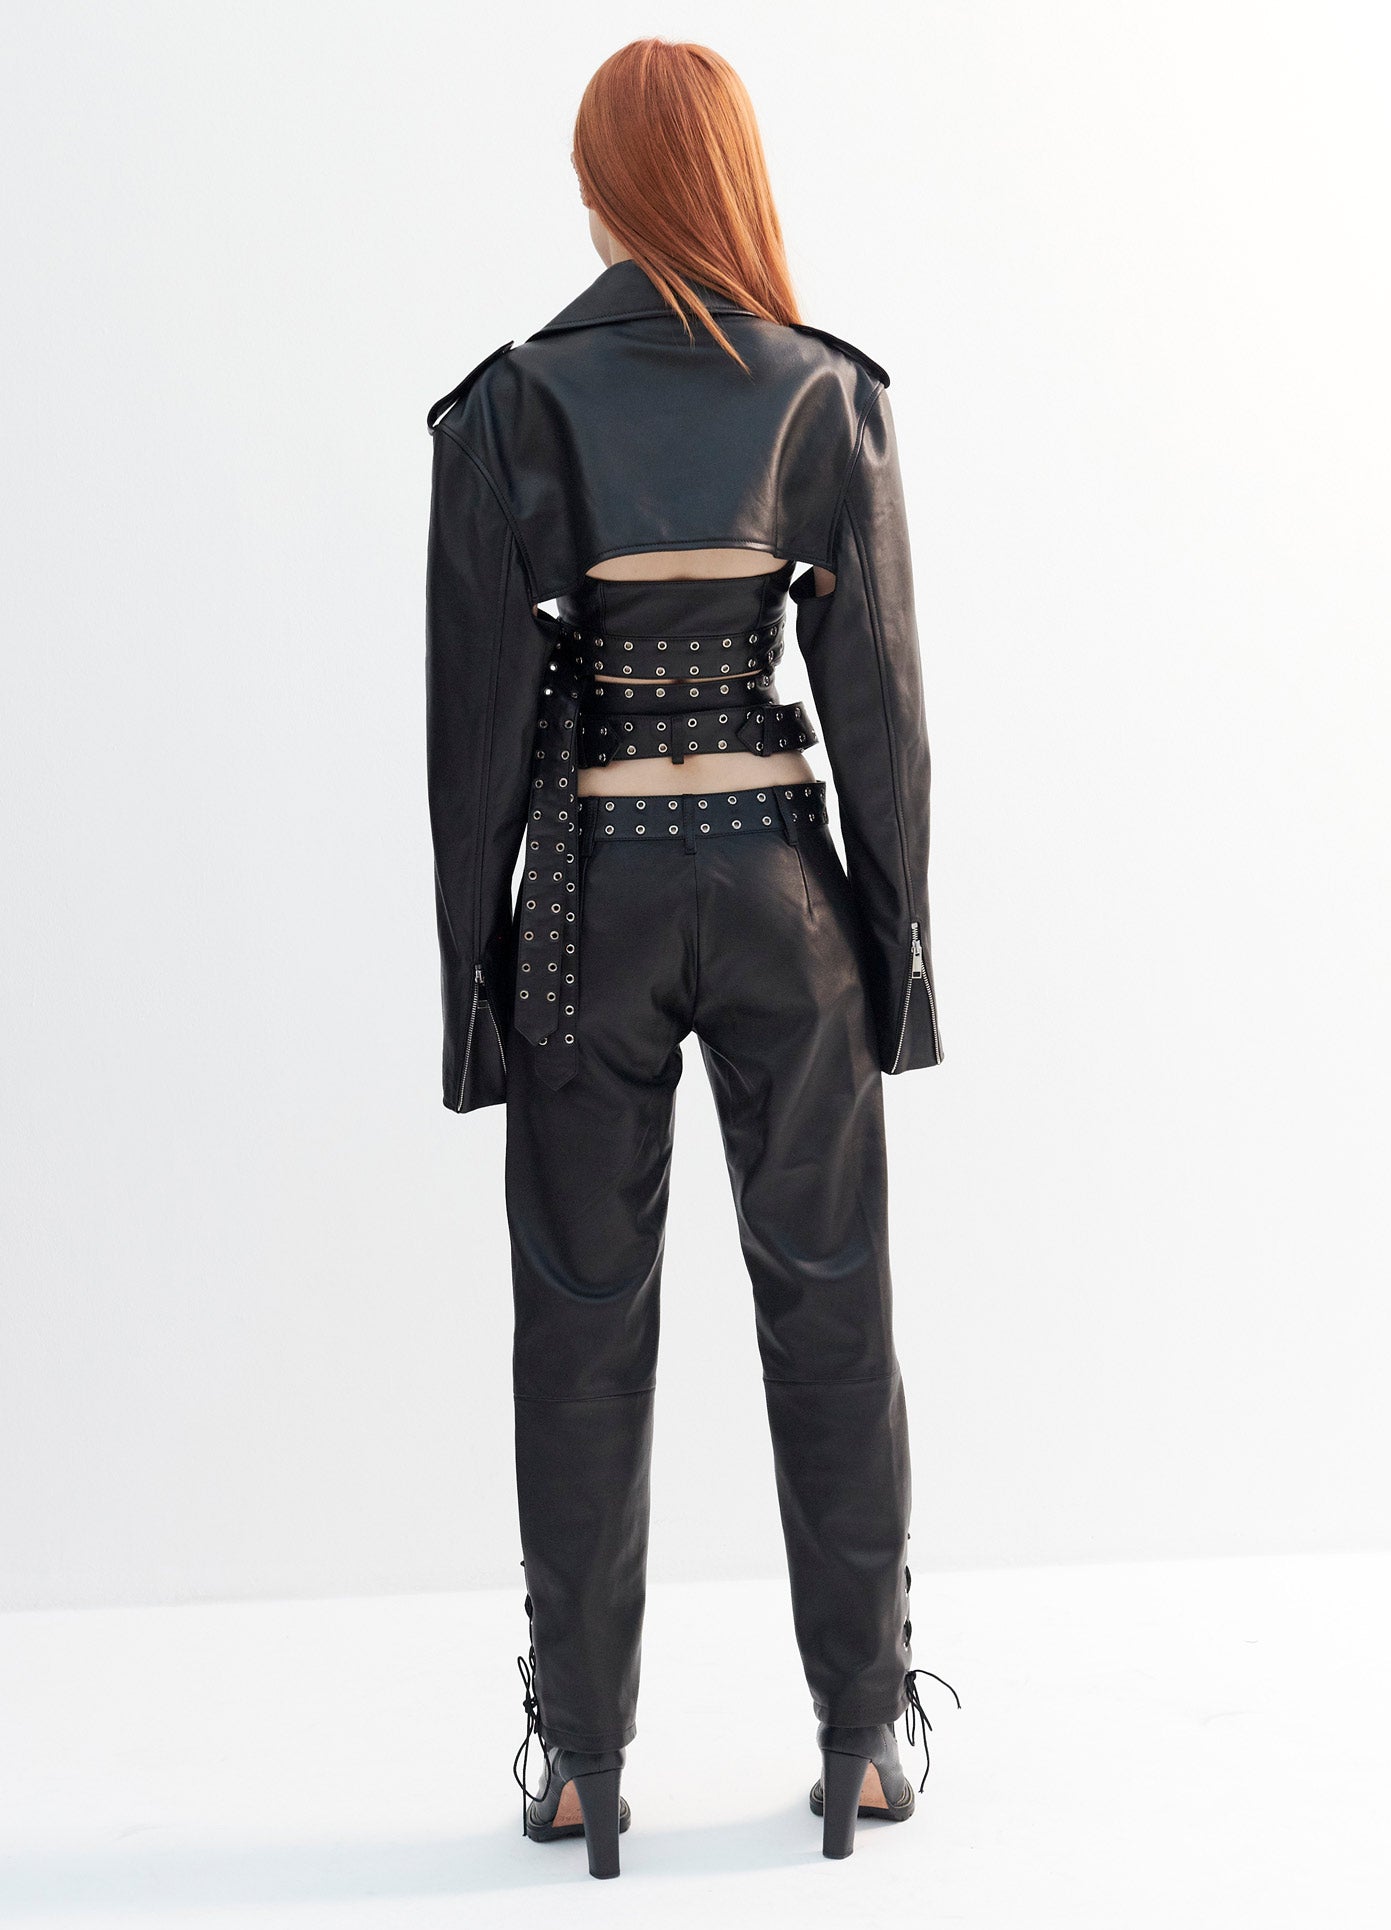 MONSE Leather Criss Cross Trousers in Black on Model Full Back View